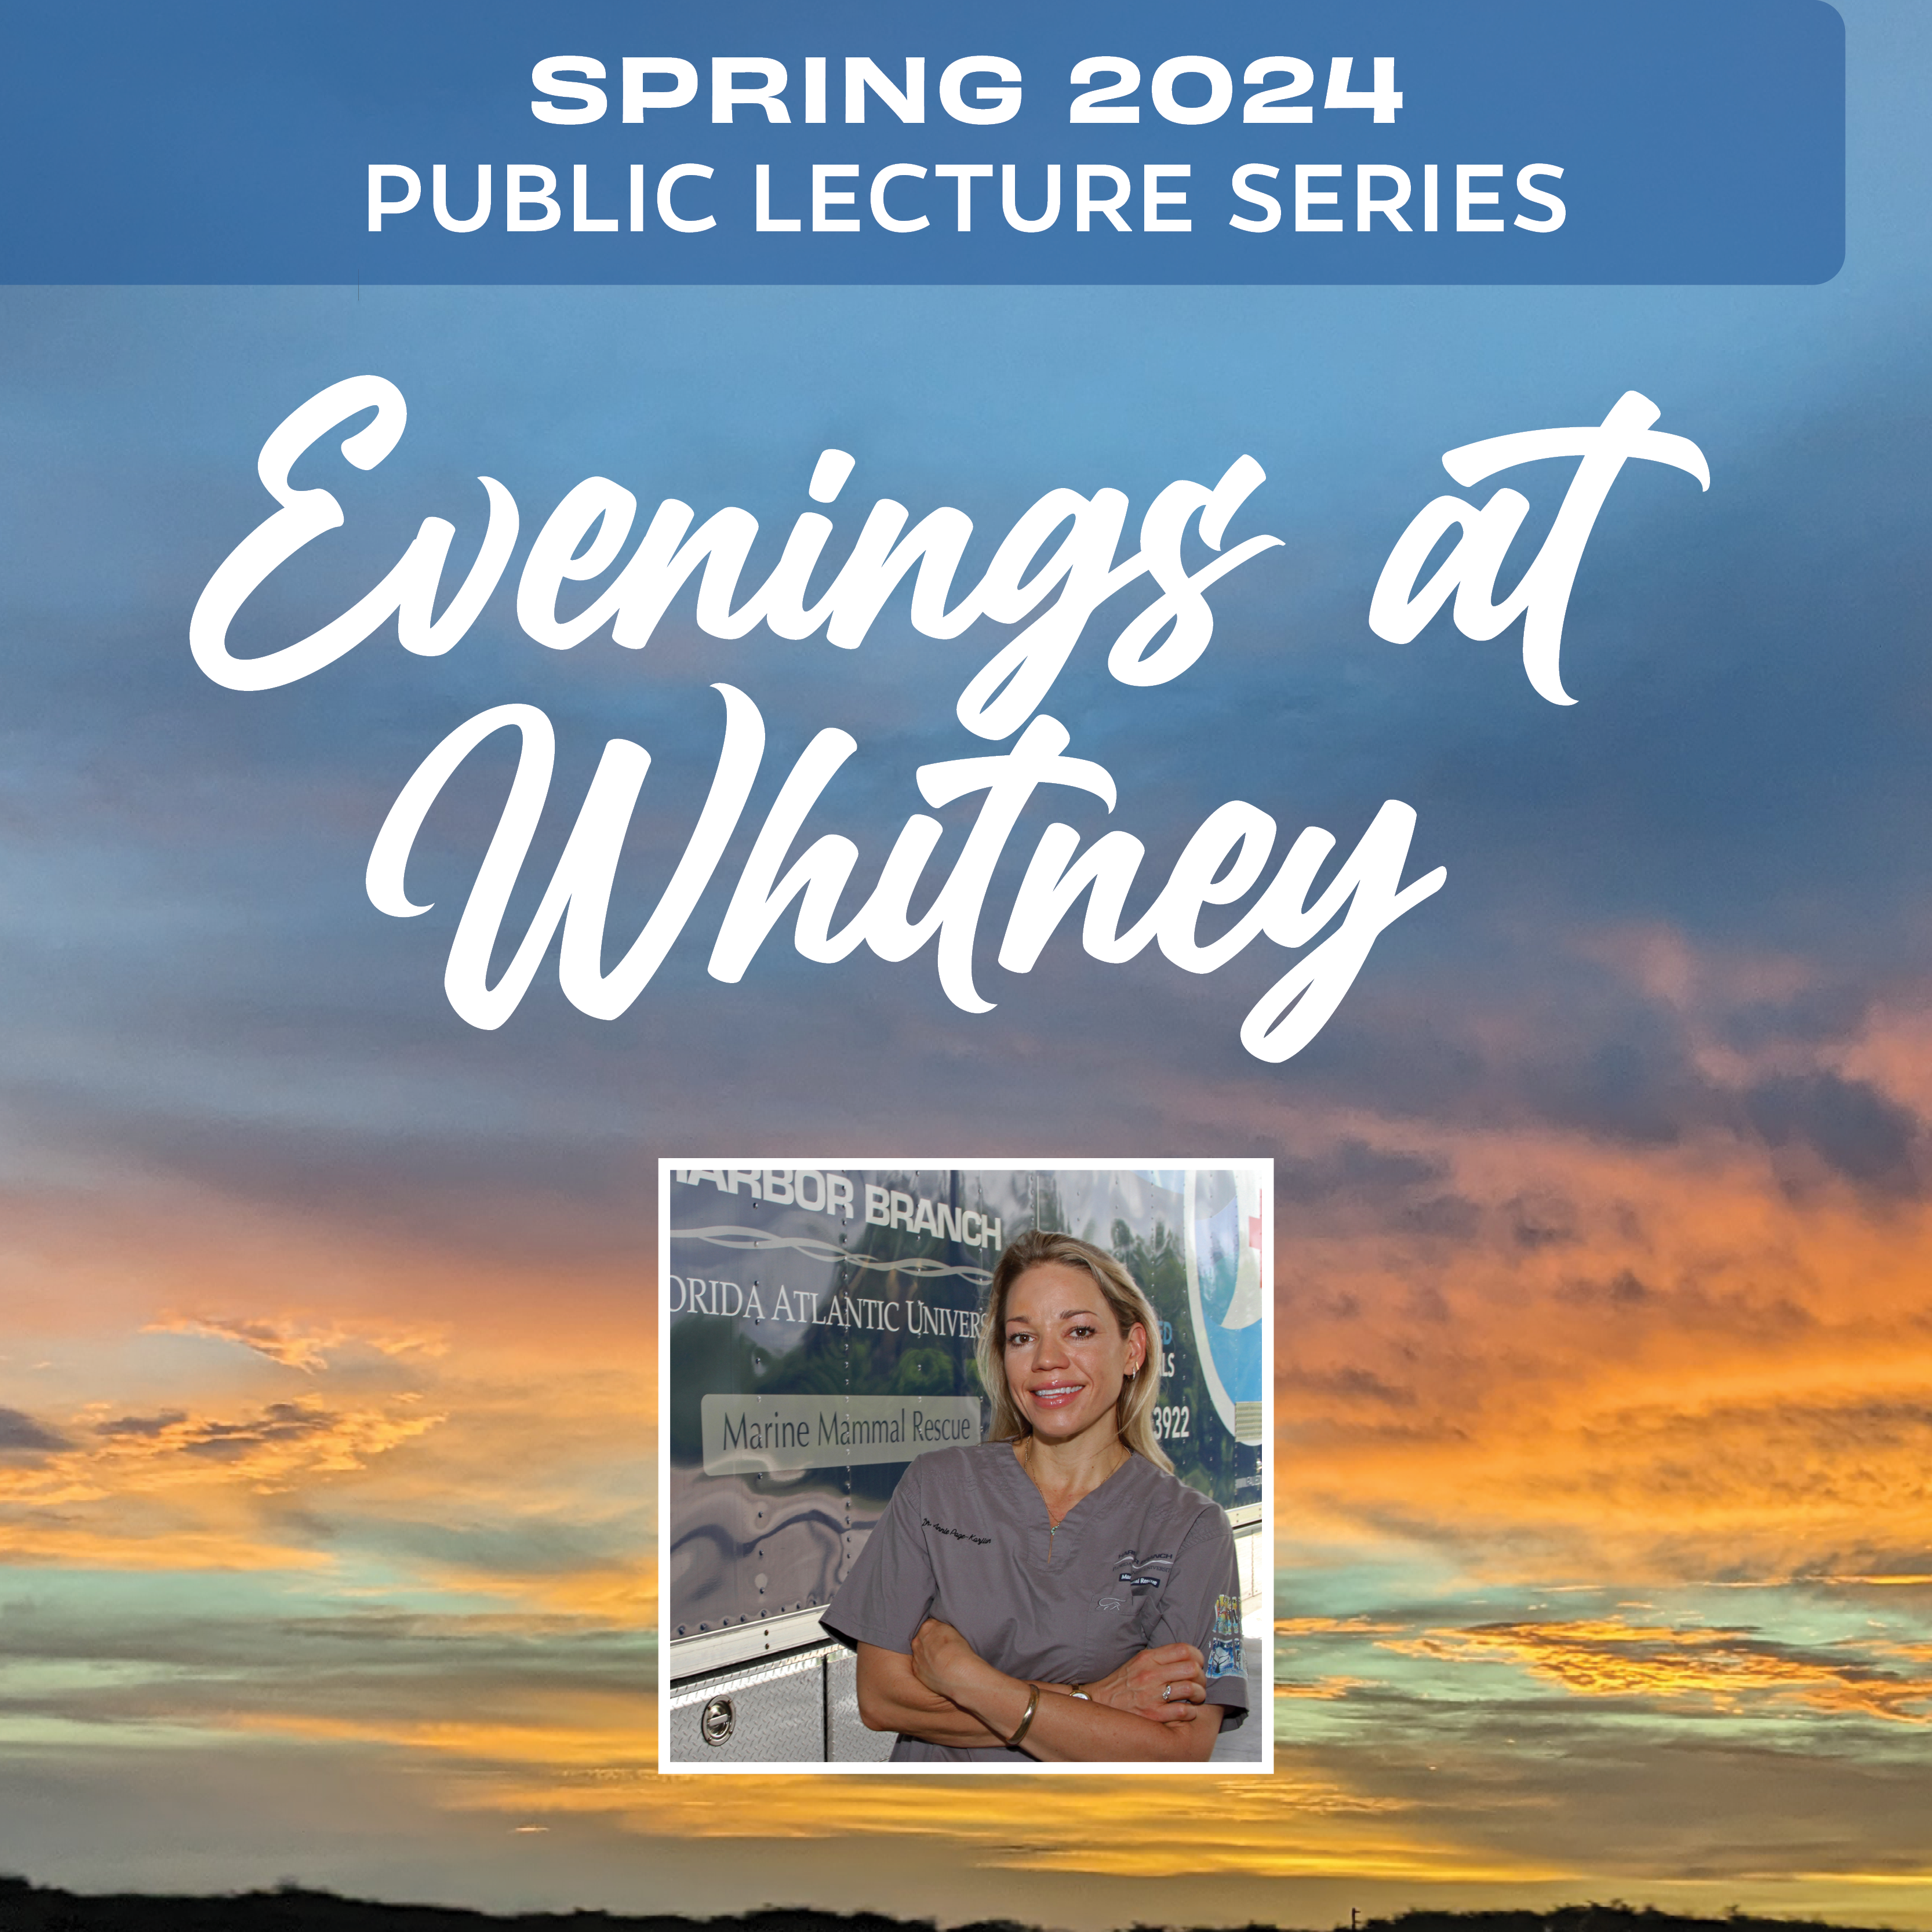 Evenings at Whitney April 11